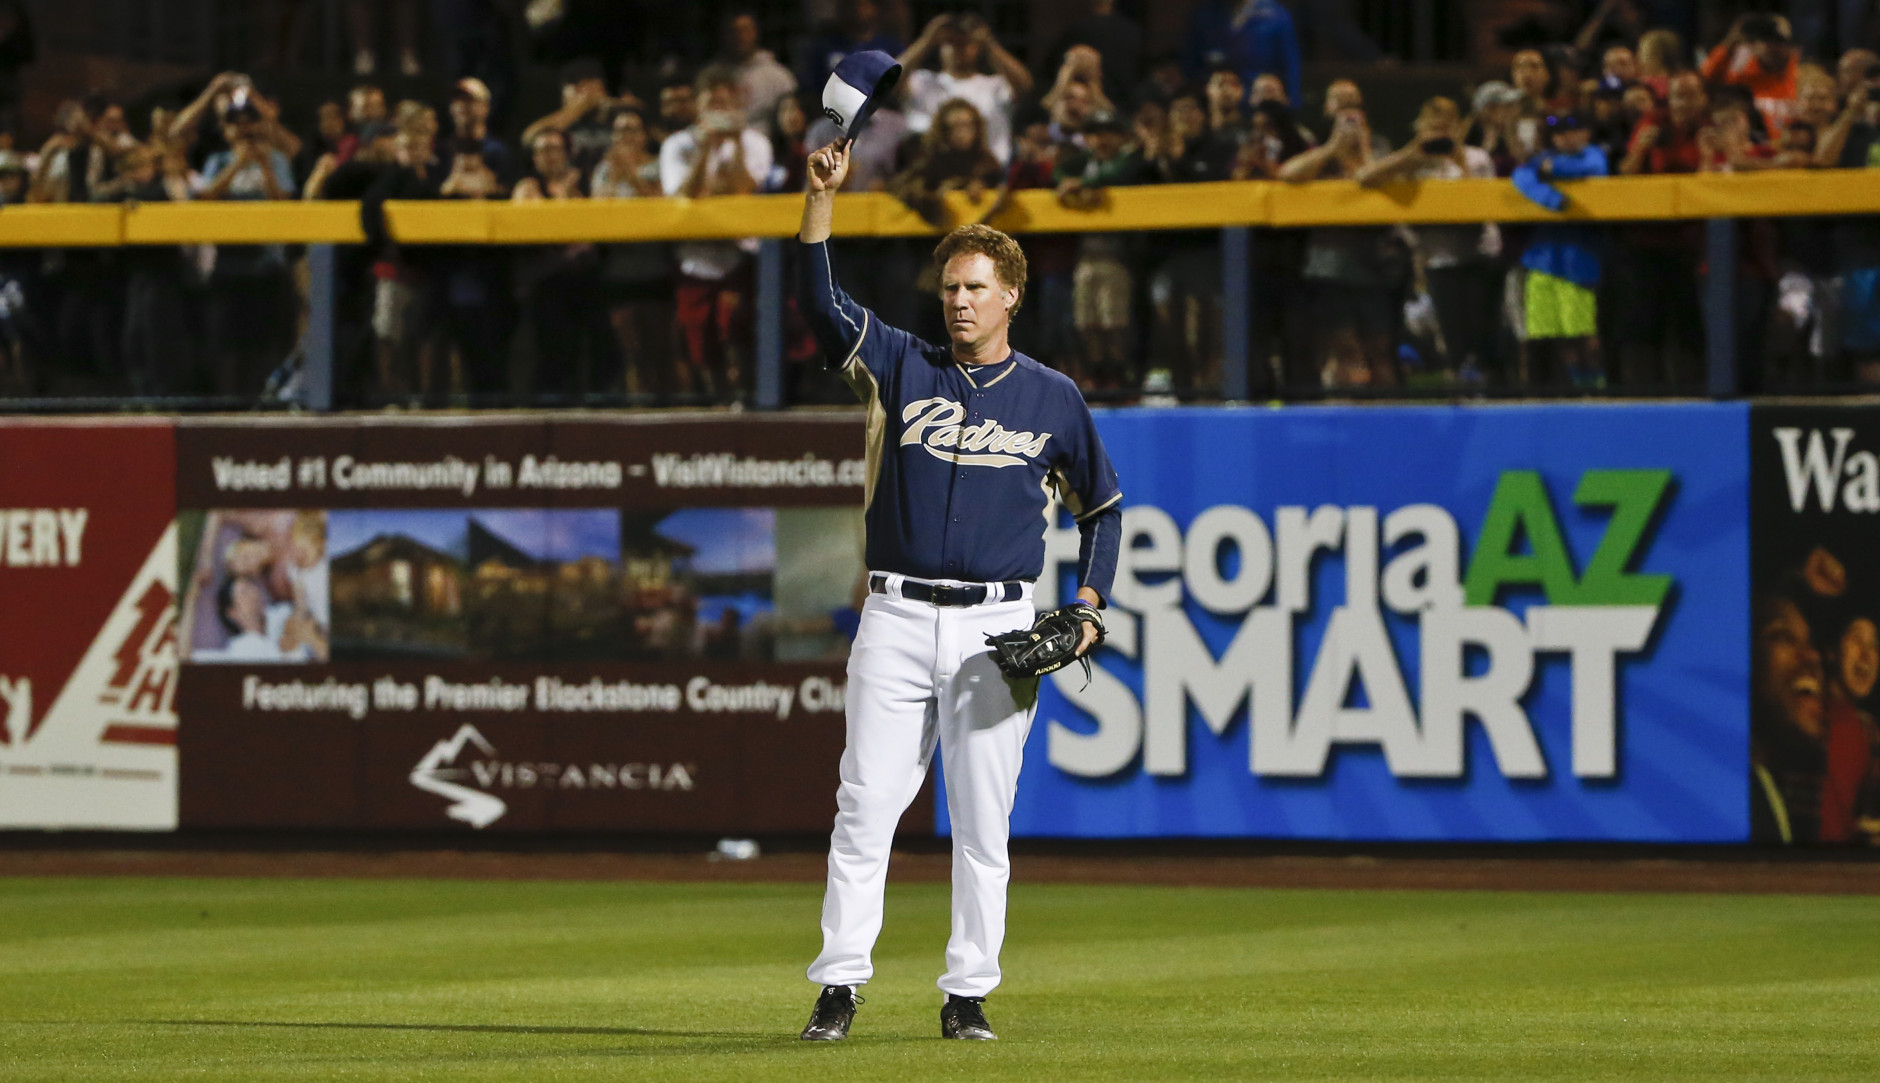 Actor Will Ferrell waves to the crowd after taking his position in right field for the San Diego Padres during a spring training baseball game between the Padres and the Los Angeles Dodgers on Thursday, March 12, 2015, in Peoria, Ariz.  (AP Photo/Lenny Ignelzi)